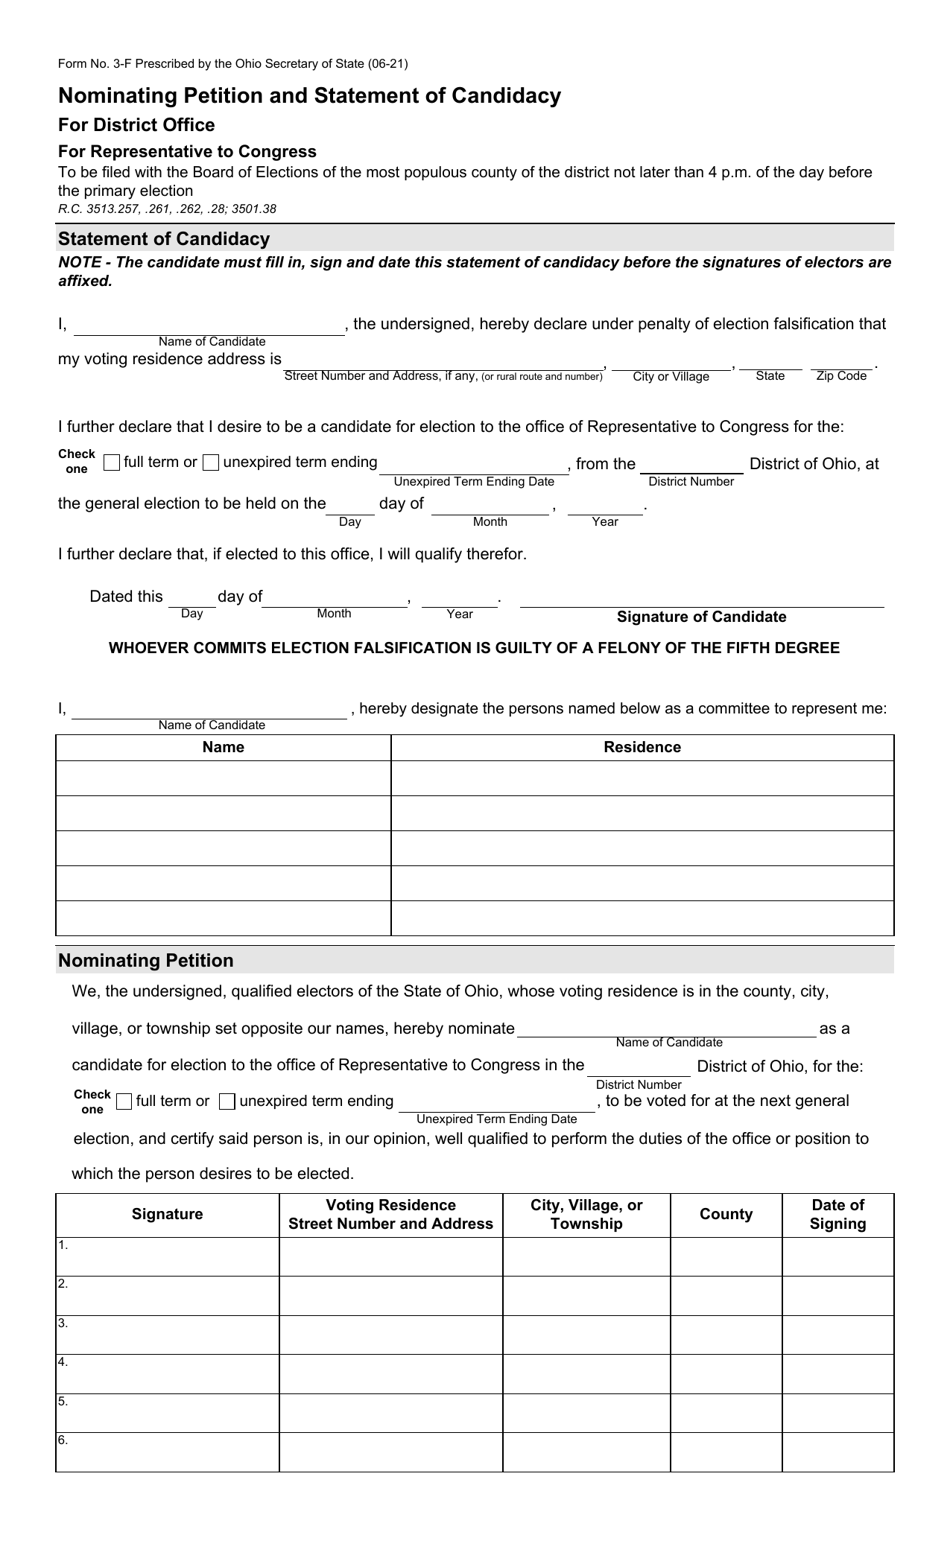 Form 3-F Nominating Petition and Statement of Candidacy for District Office for Representative to Congress - Ohio, Page 1